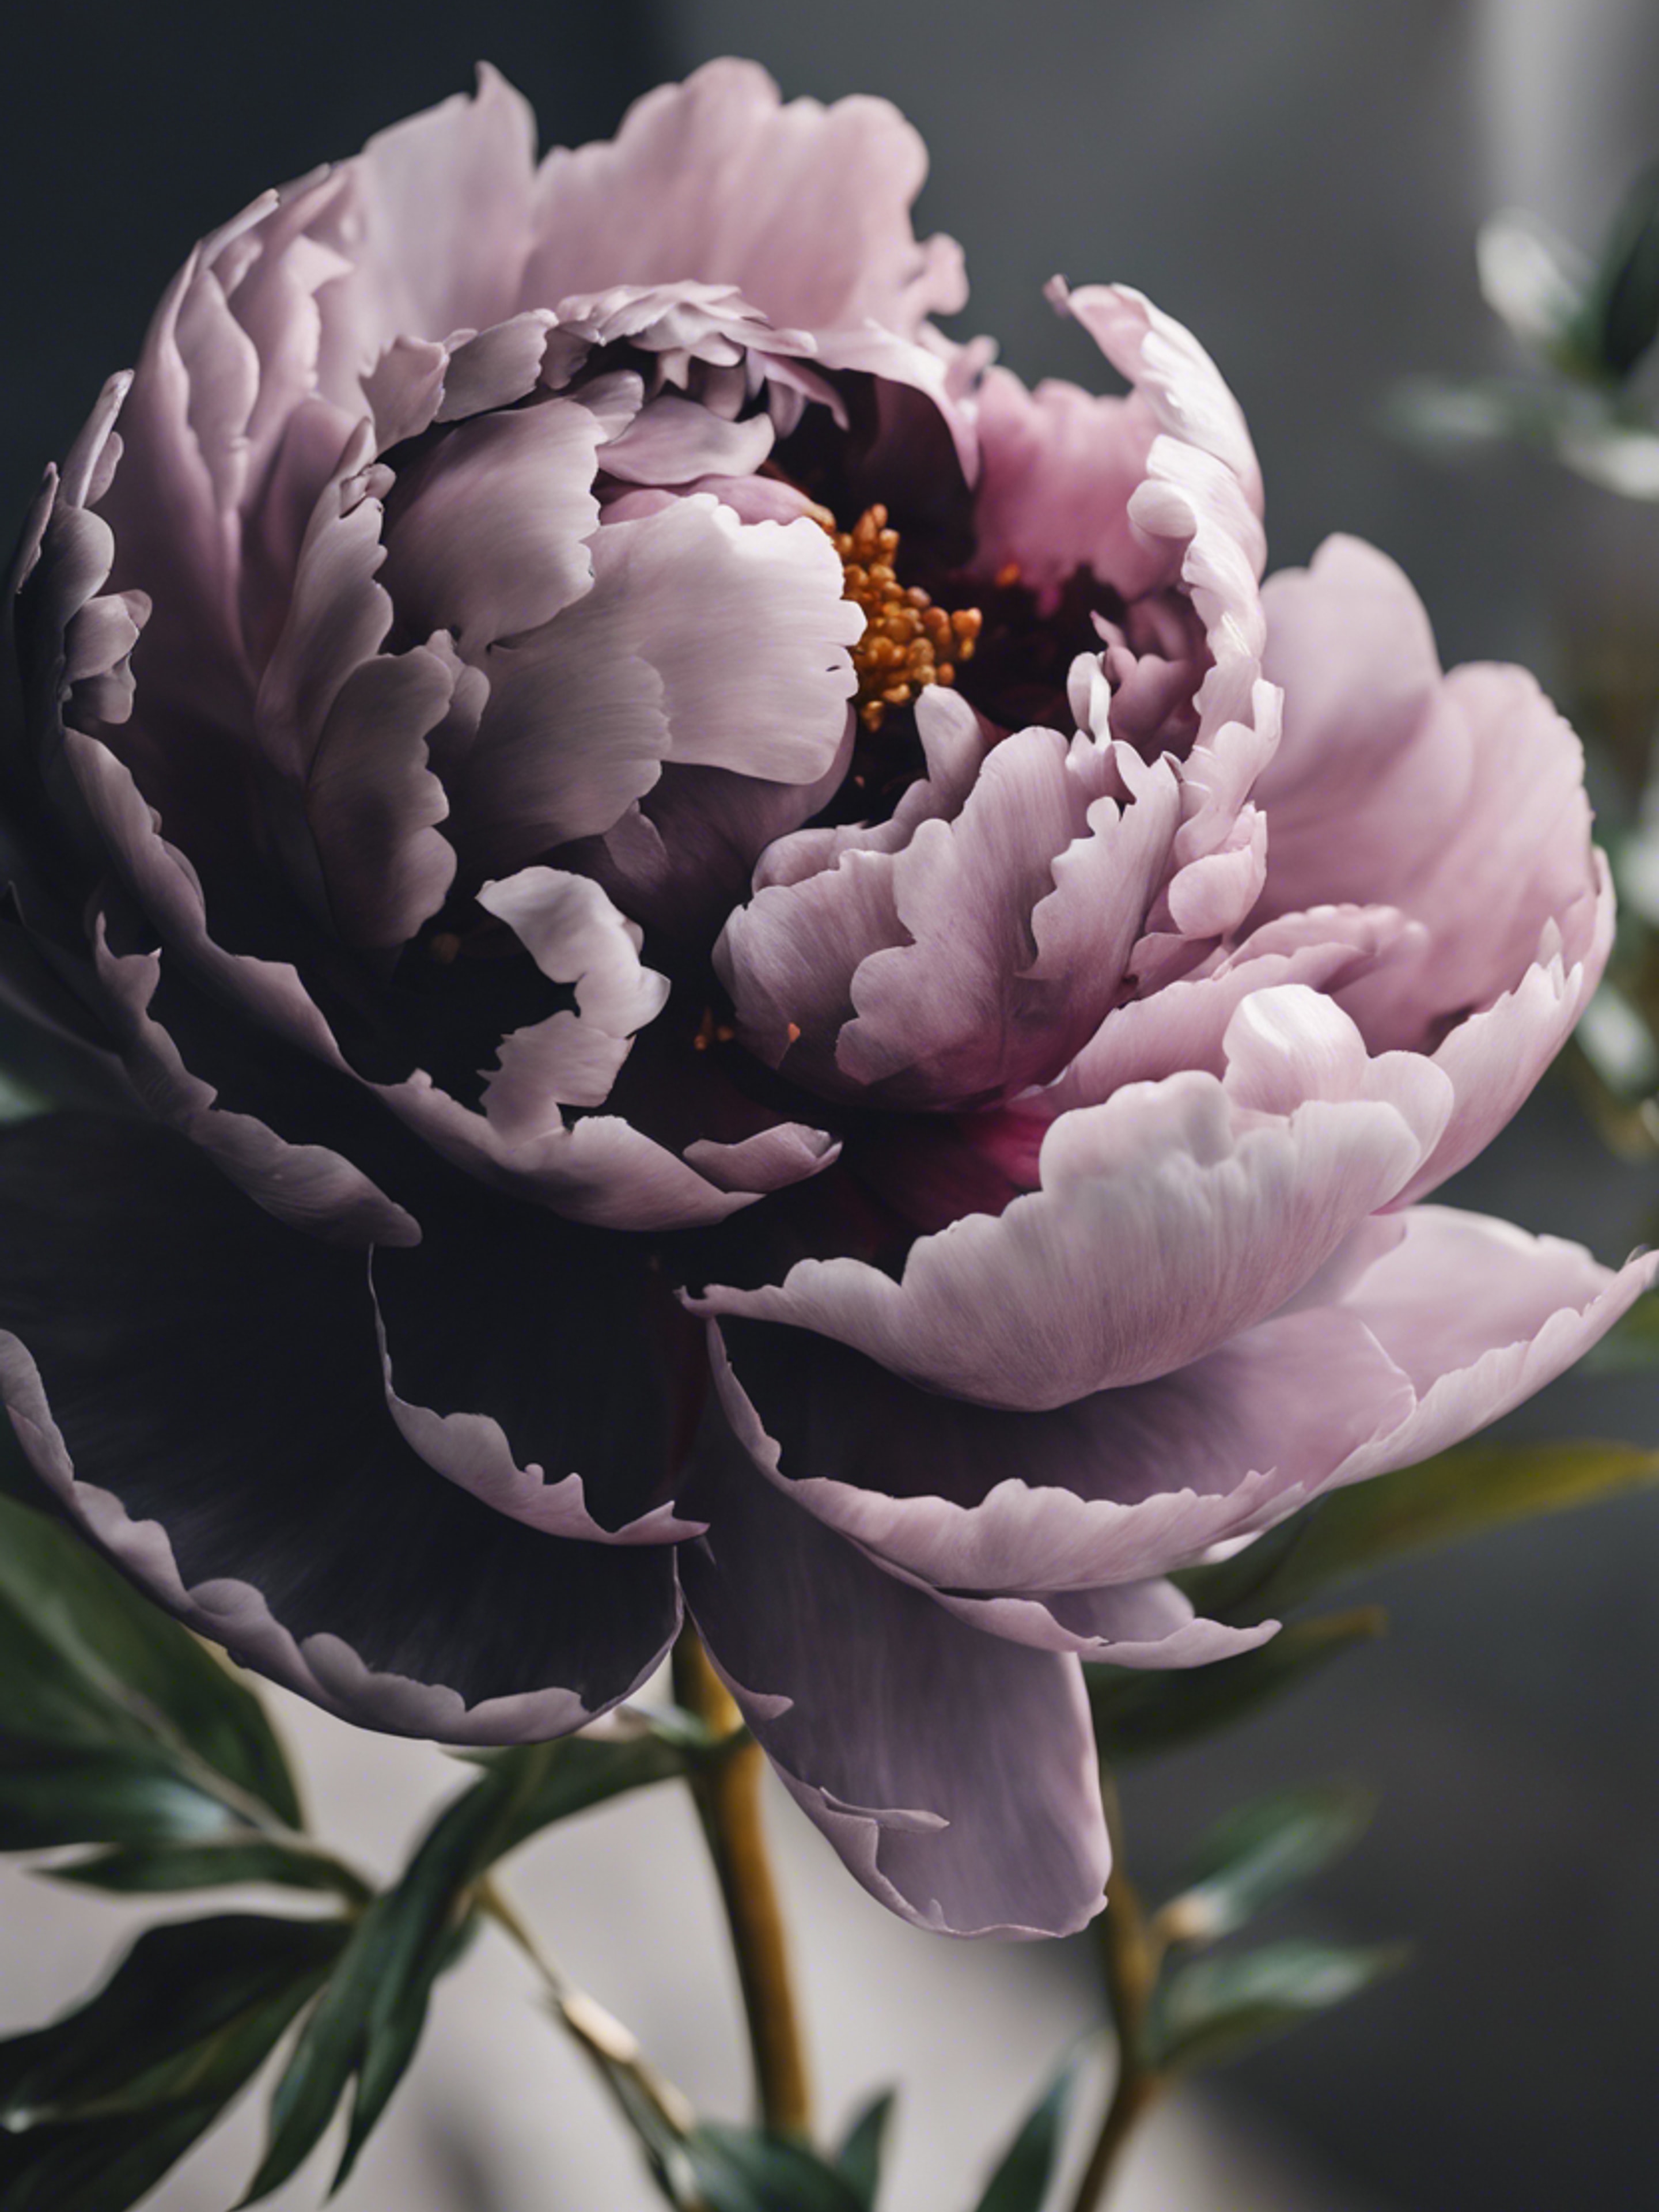 A black peony, the symbol of prosperity and honor, complementing a traditional Asian painting. Tapeta na zeď[2c78f74174874eadaf7e]